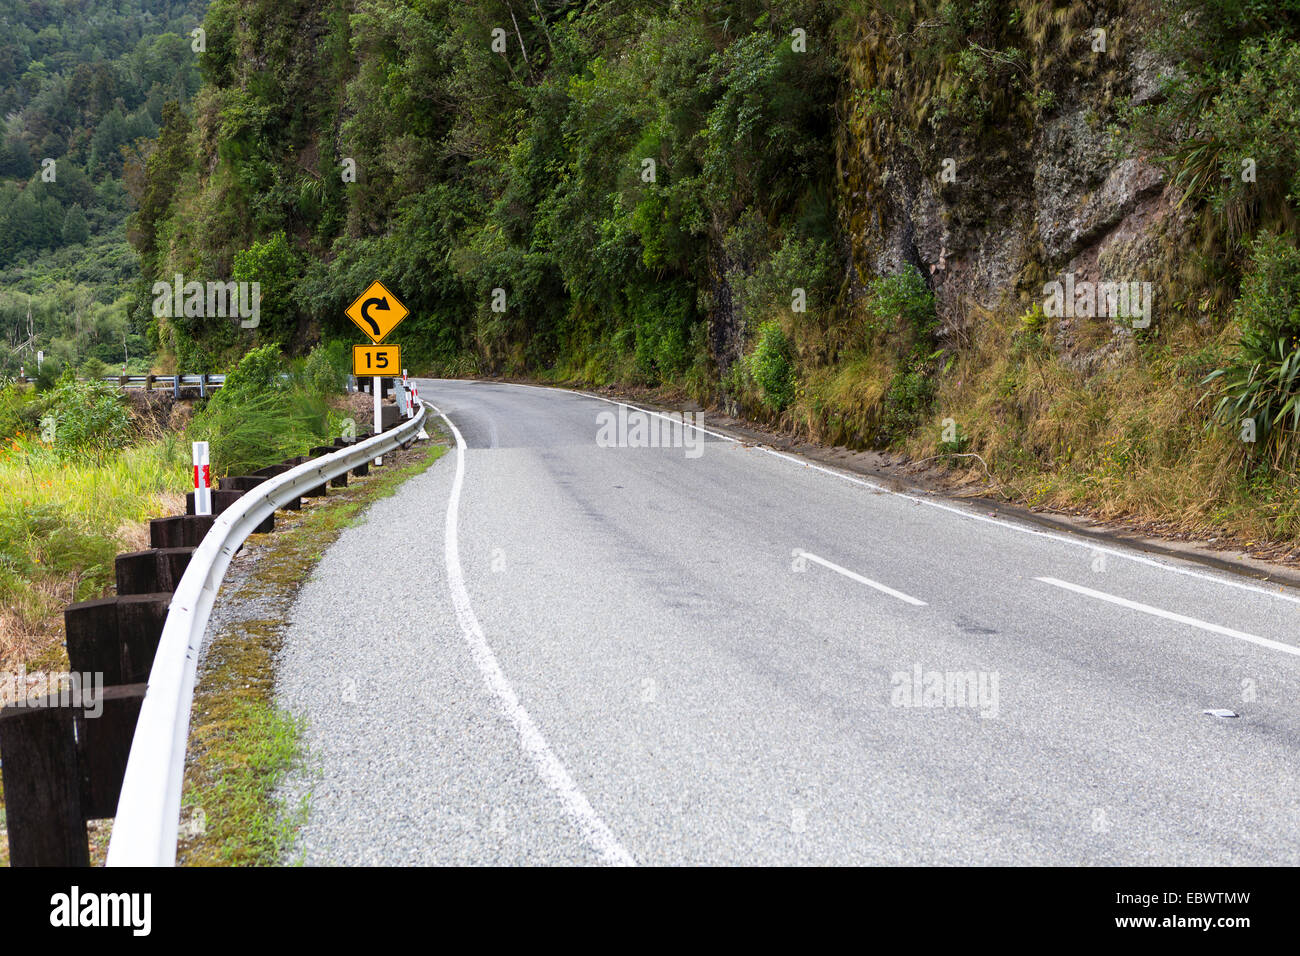 'Dangerous curve' warning sign, road with a dangerous curve, Charleston, West Coast Region, New Zealand Stock Photo